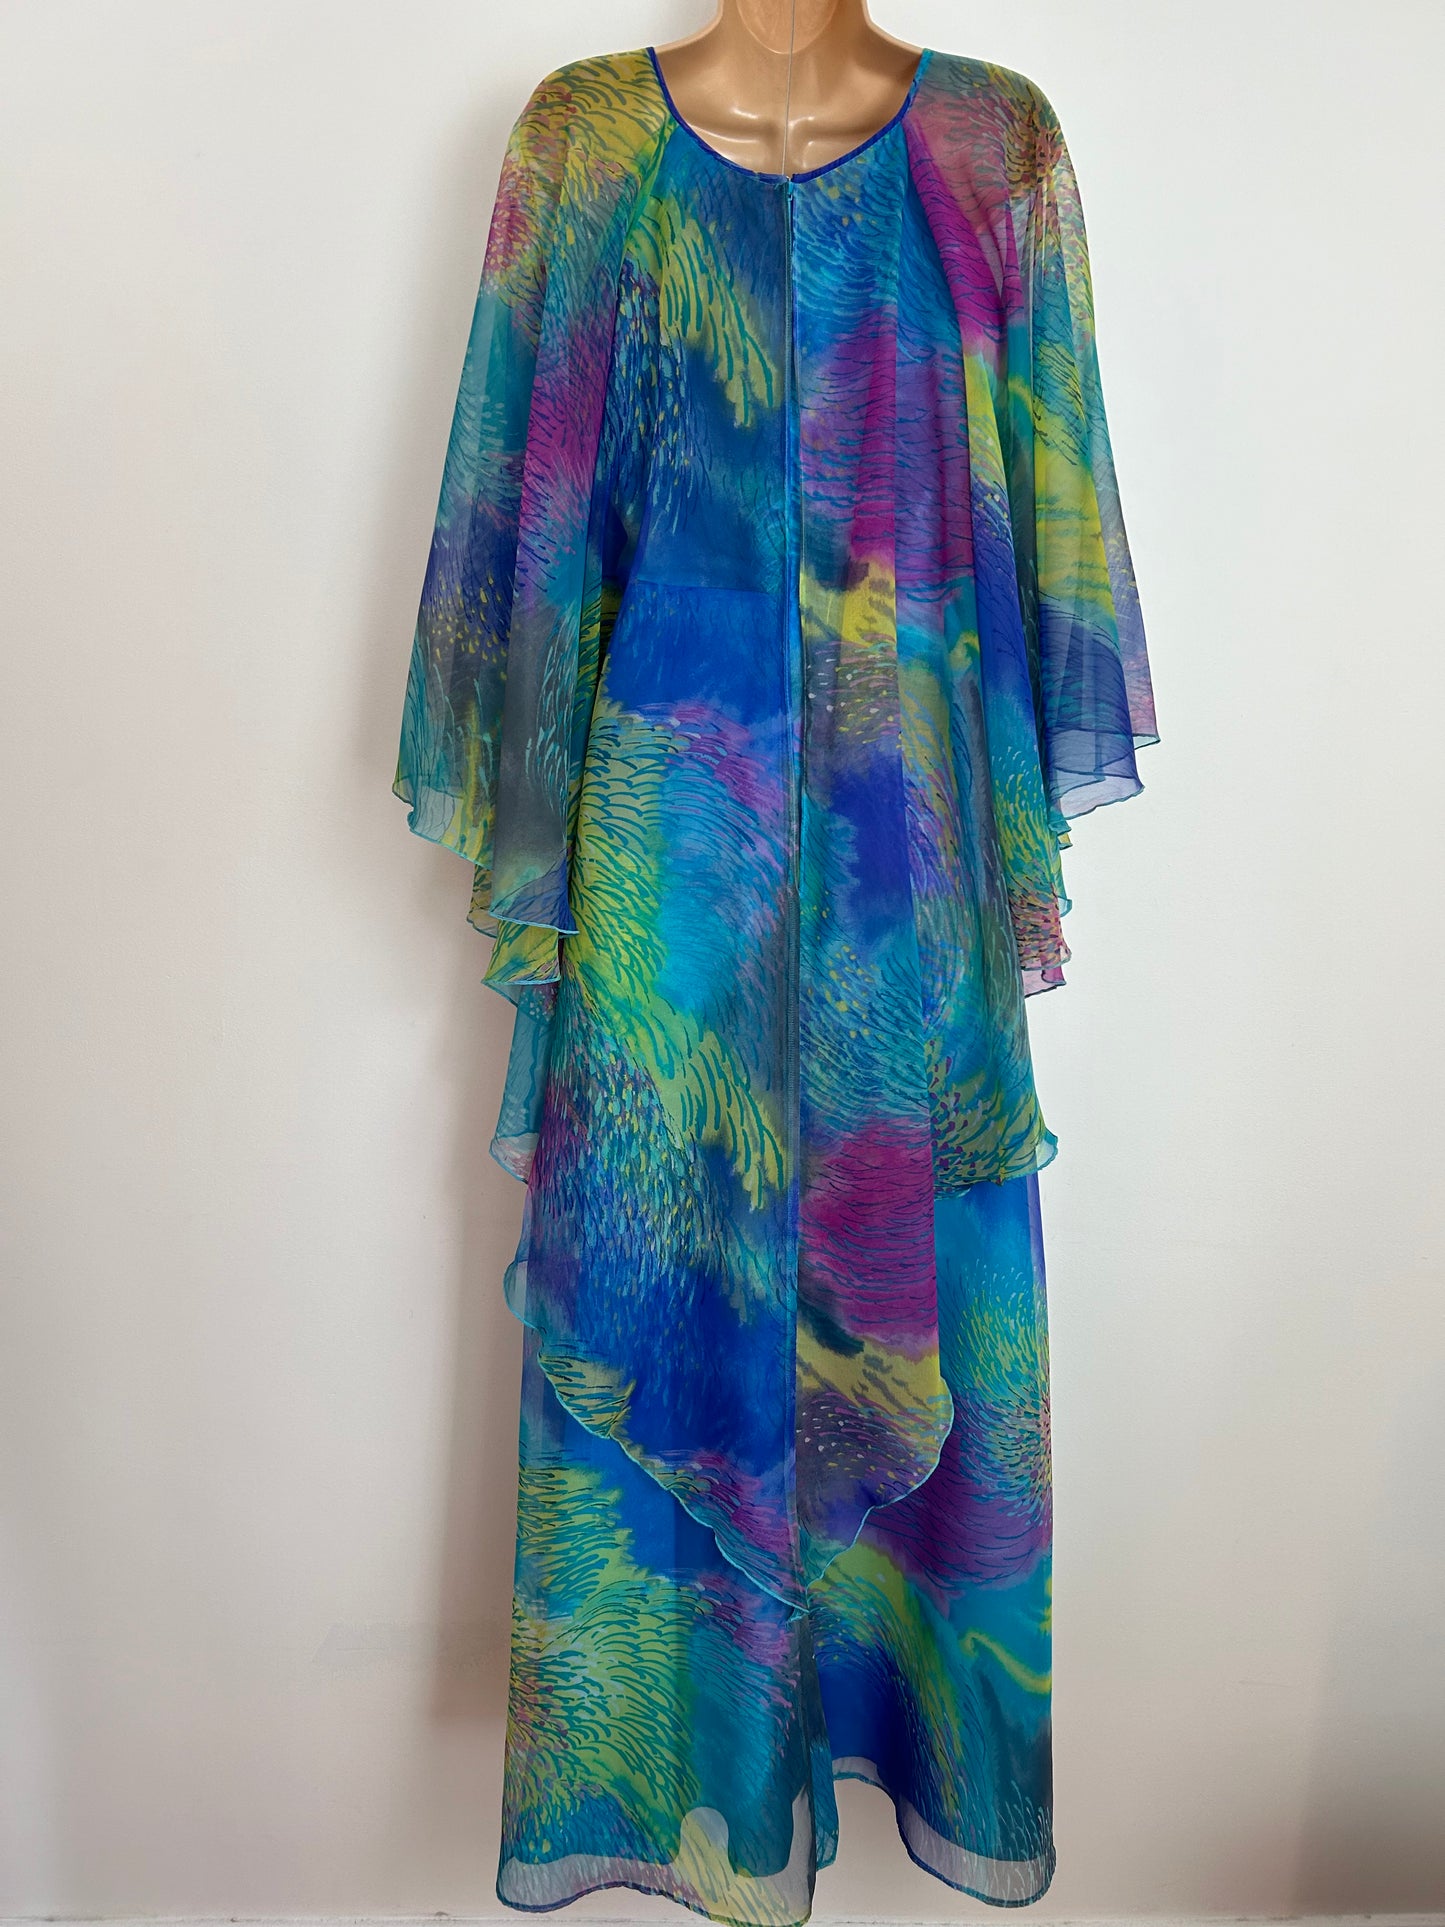 Vintage 1970s VERA MONT UK Size 6 Blue Yellowy Green & Purple Abstract Print Double Layered Very Floaty Maxi Dress